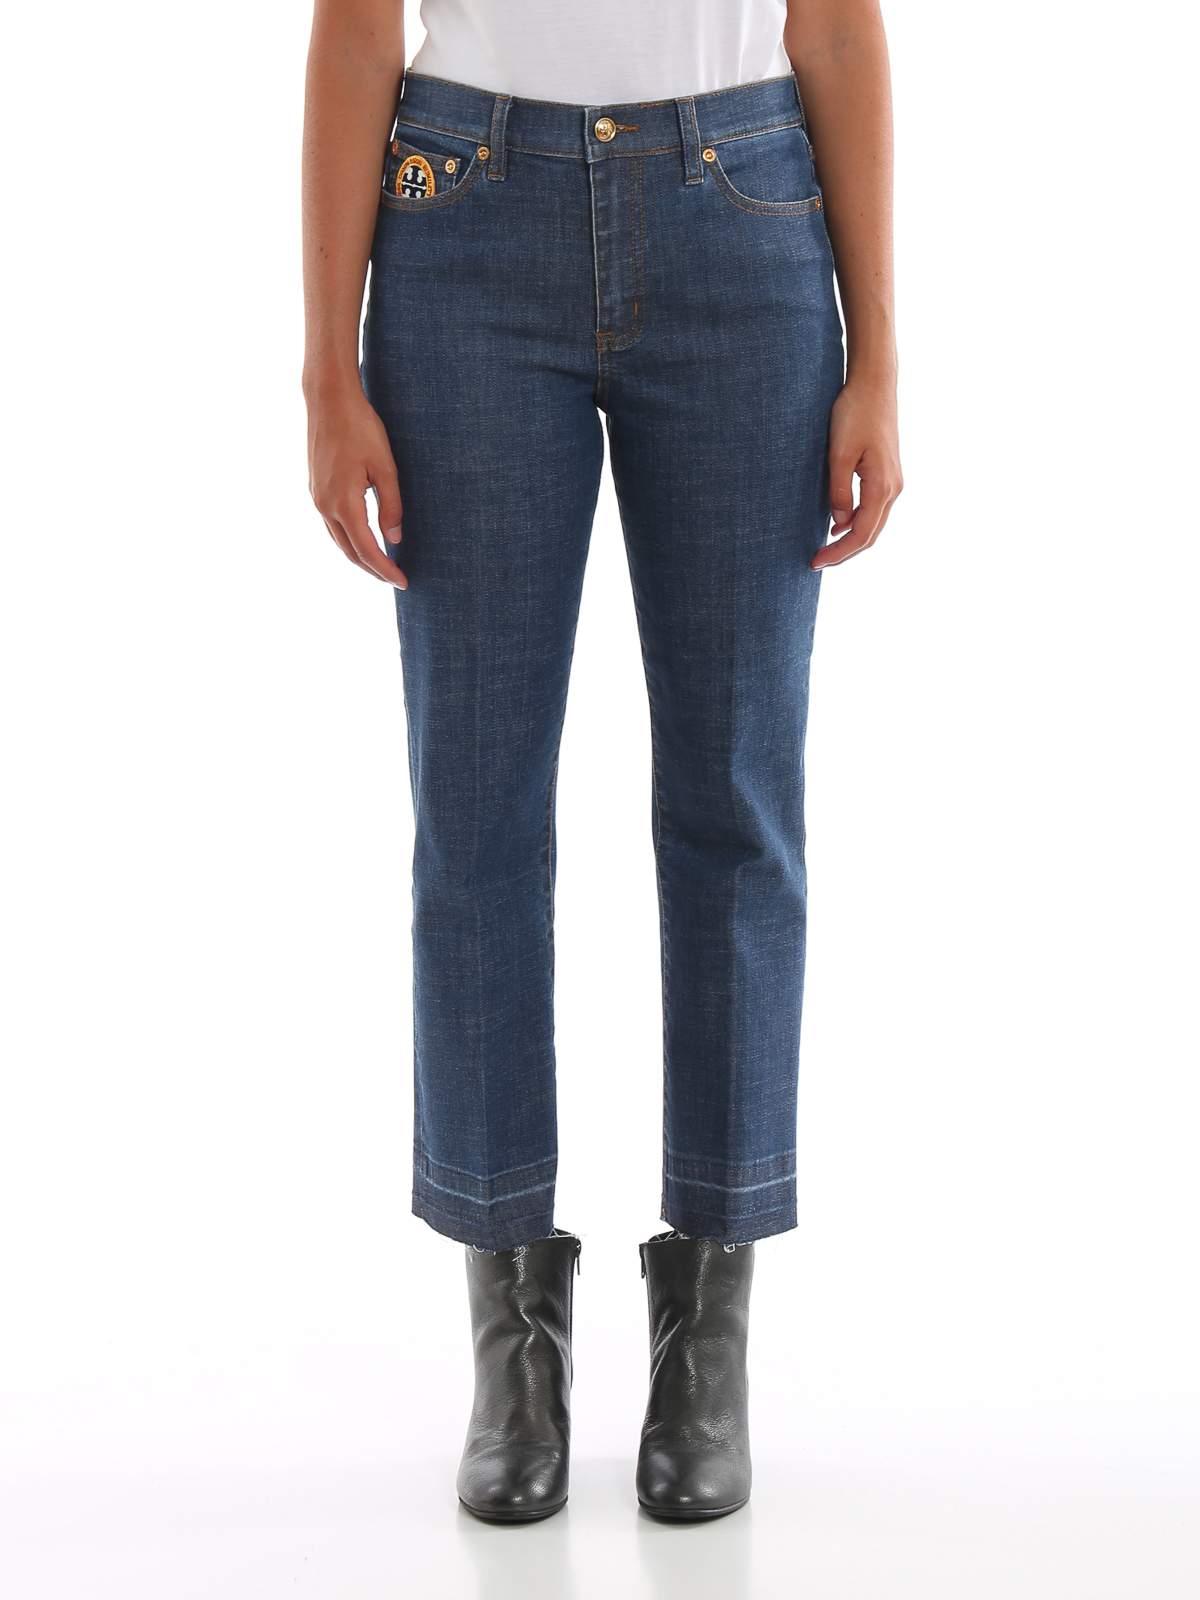 Tory Burch Cropped Jeans Austria, SAVE 50% 